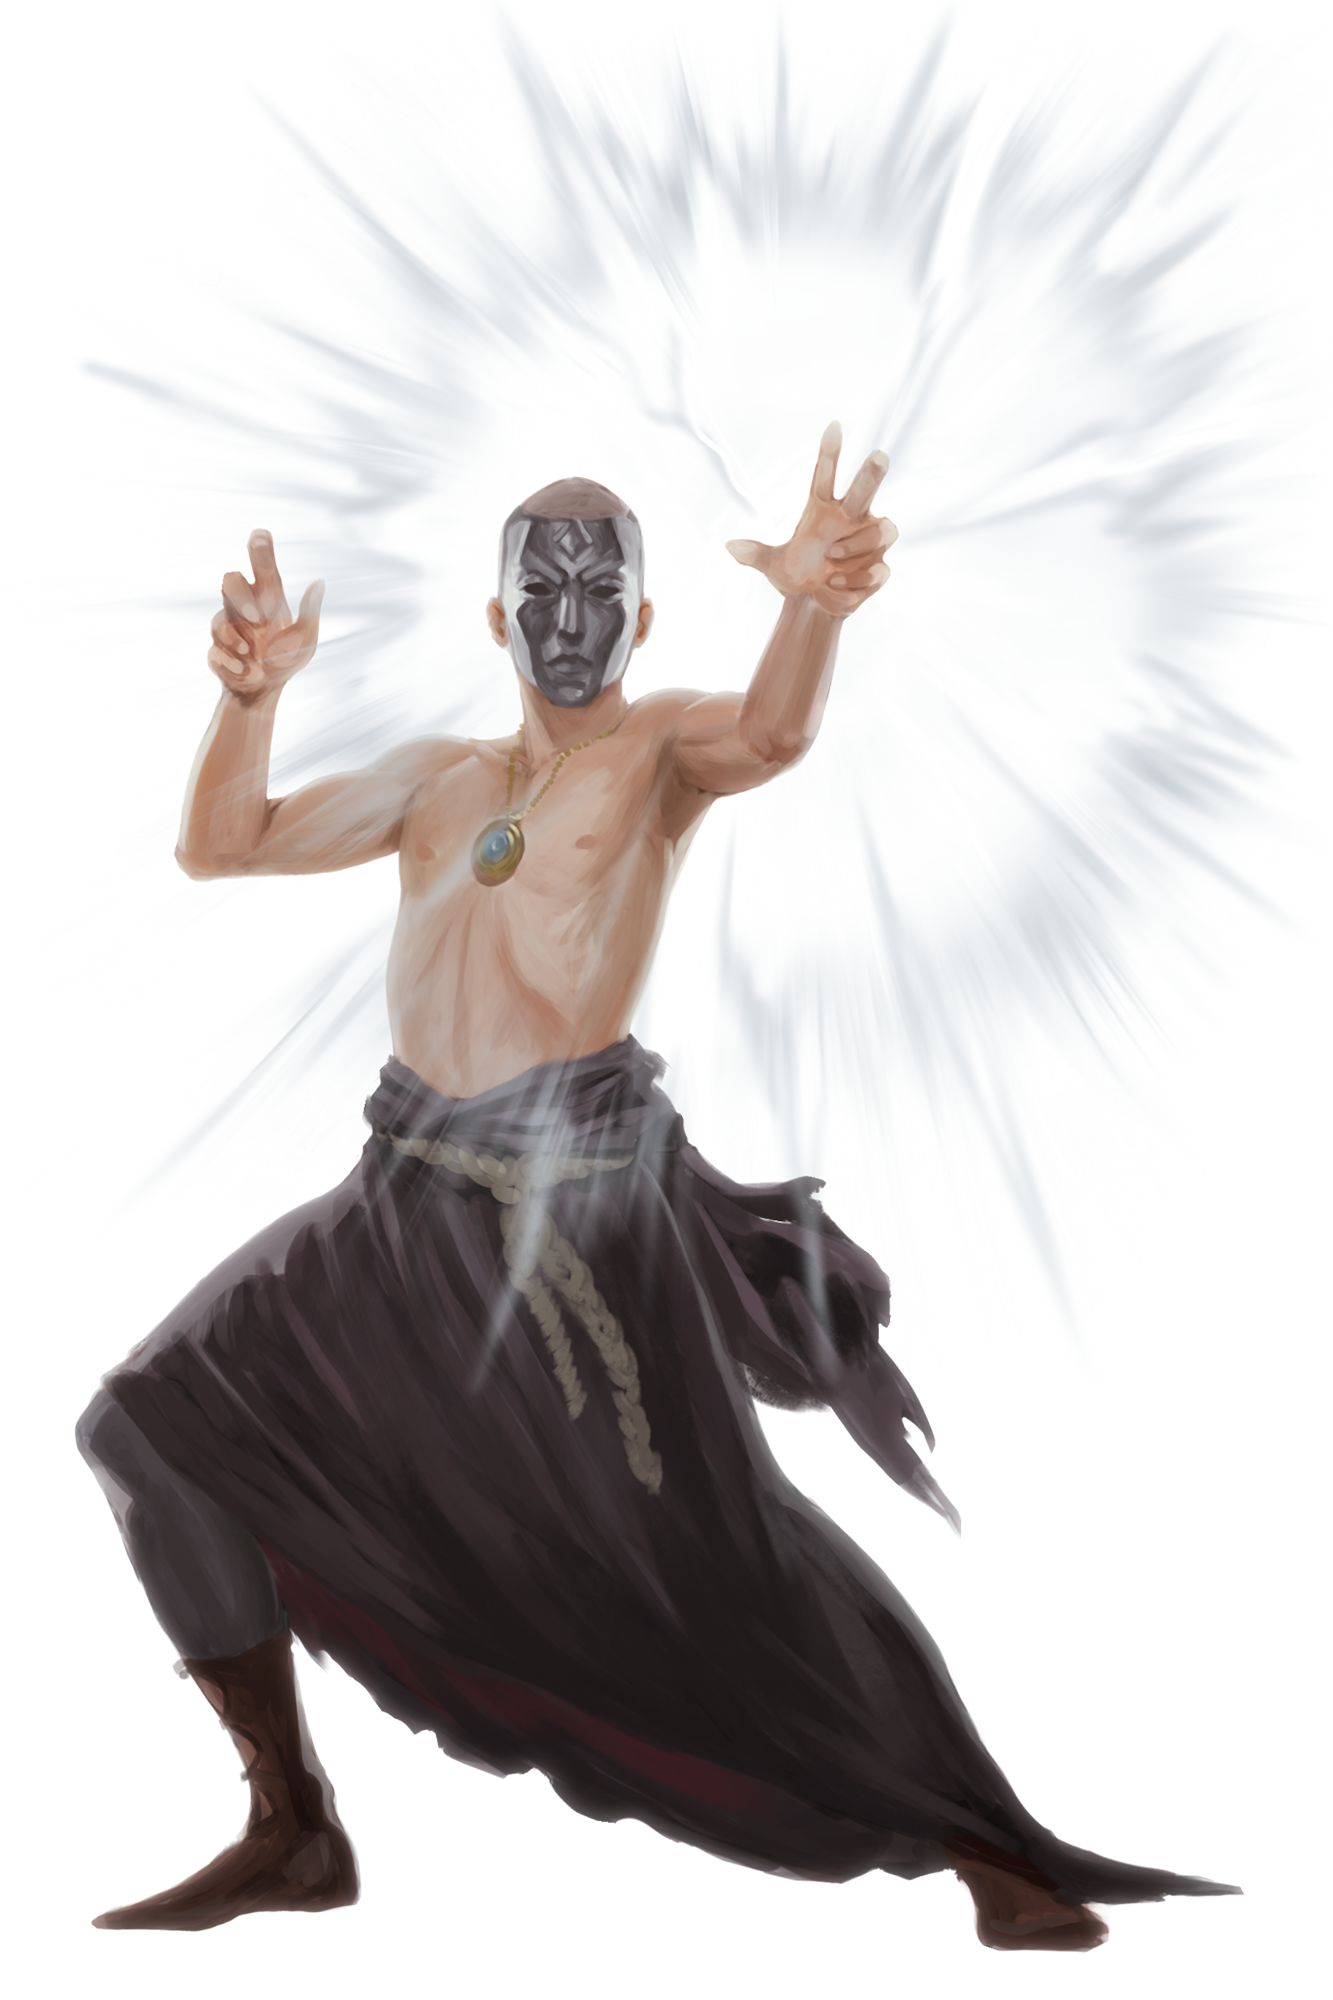 Venture-Captain Narsen, shirtless but still wearing his Razmiri mask, with the top of his robes wrapped around his waist. He’s in a defensive magical combat pose.